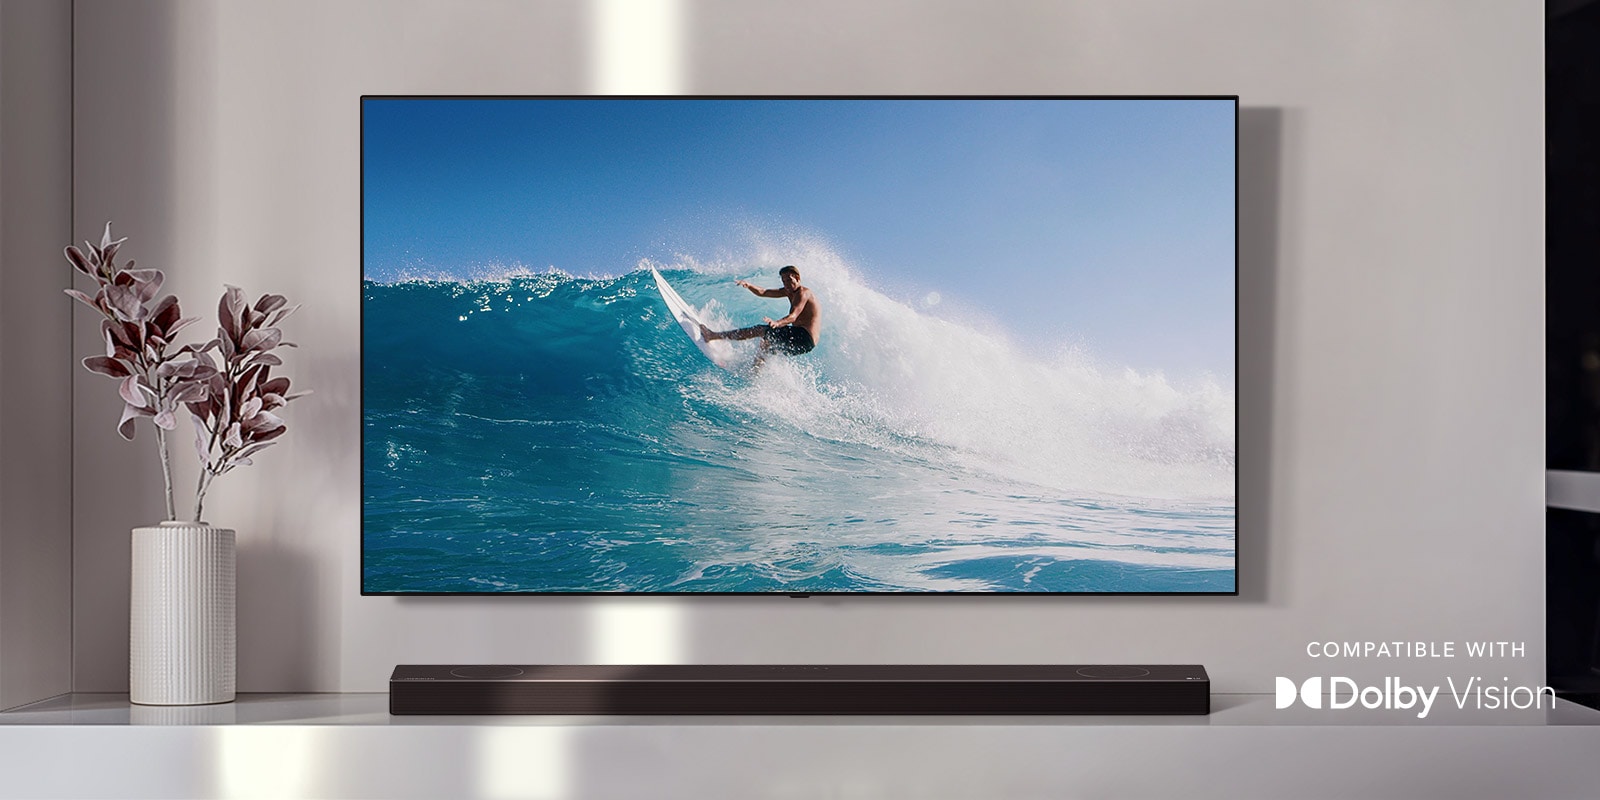 TV is on the wall. TV shows a man surfing on big wave. LG Soundbar is right below TV on a white shelf. There is a vase with a flower right next to the soundbar. (play the video) 